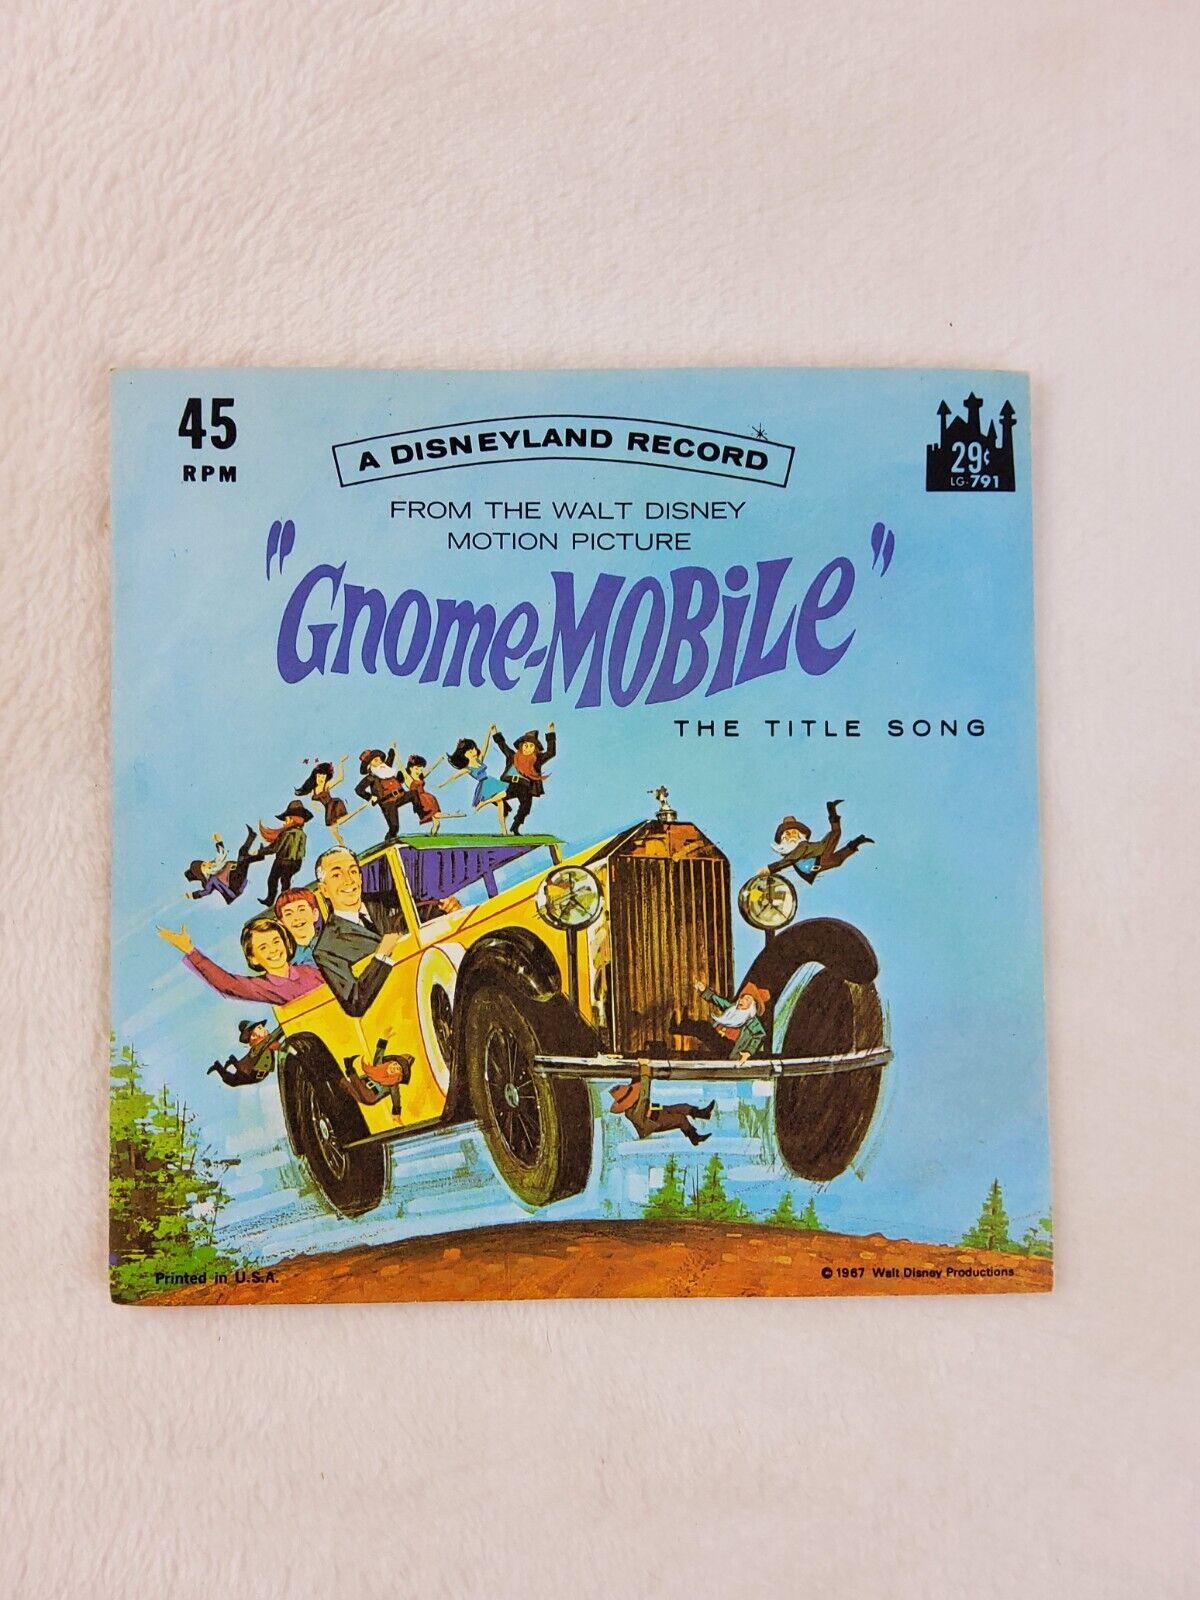 GNOME MOBILE The Title Song Disneyland Record Productions 1967 - 45 RPM LG-791